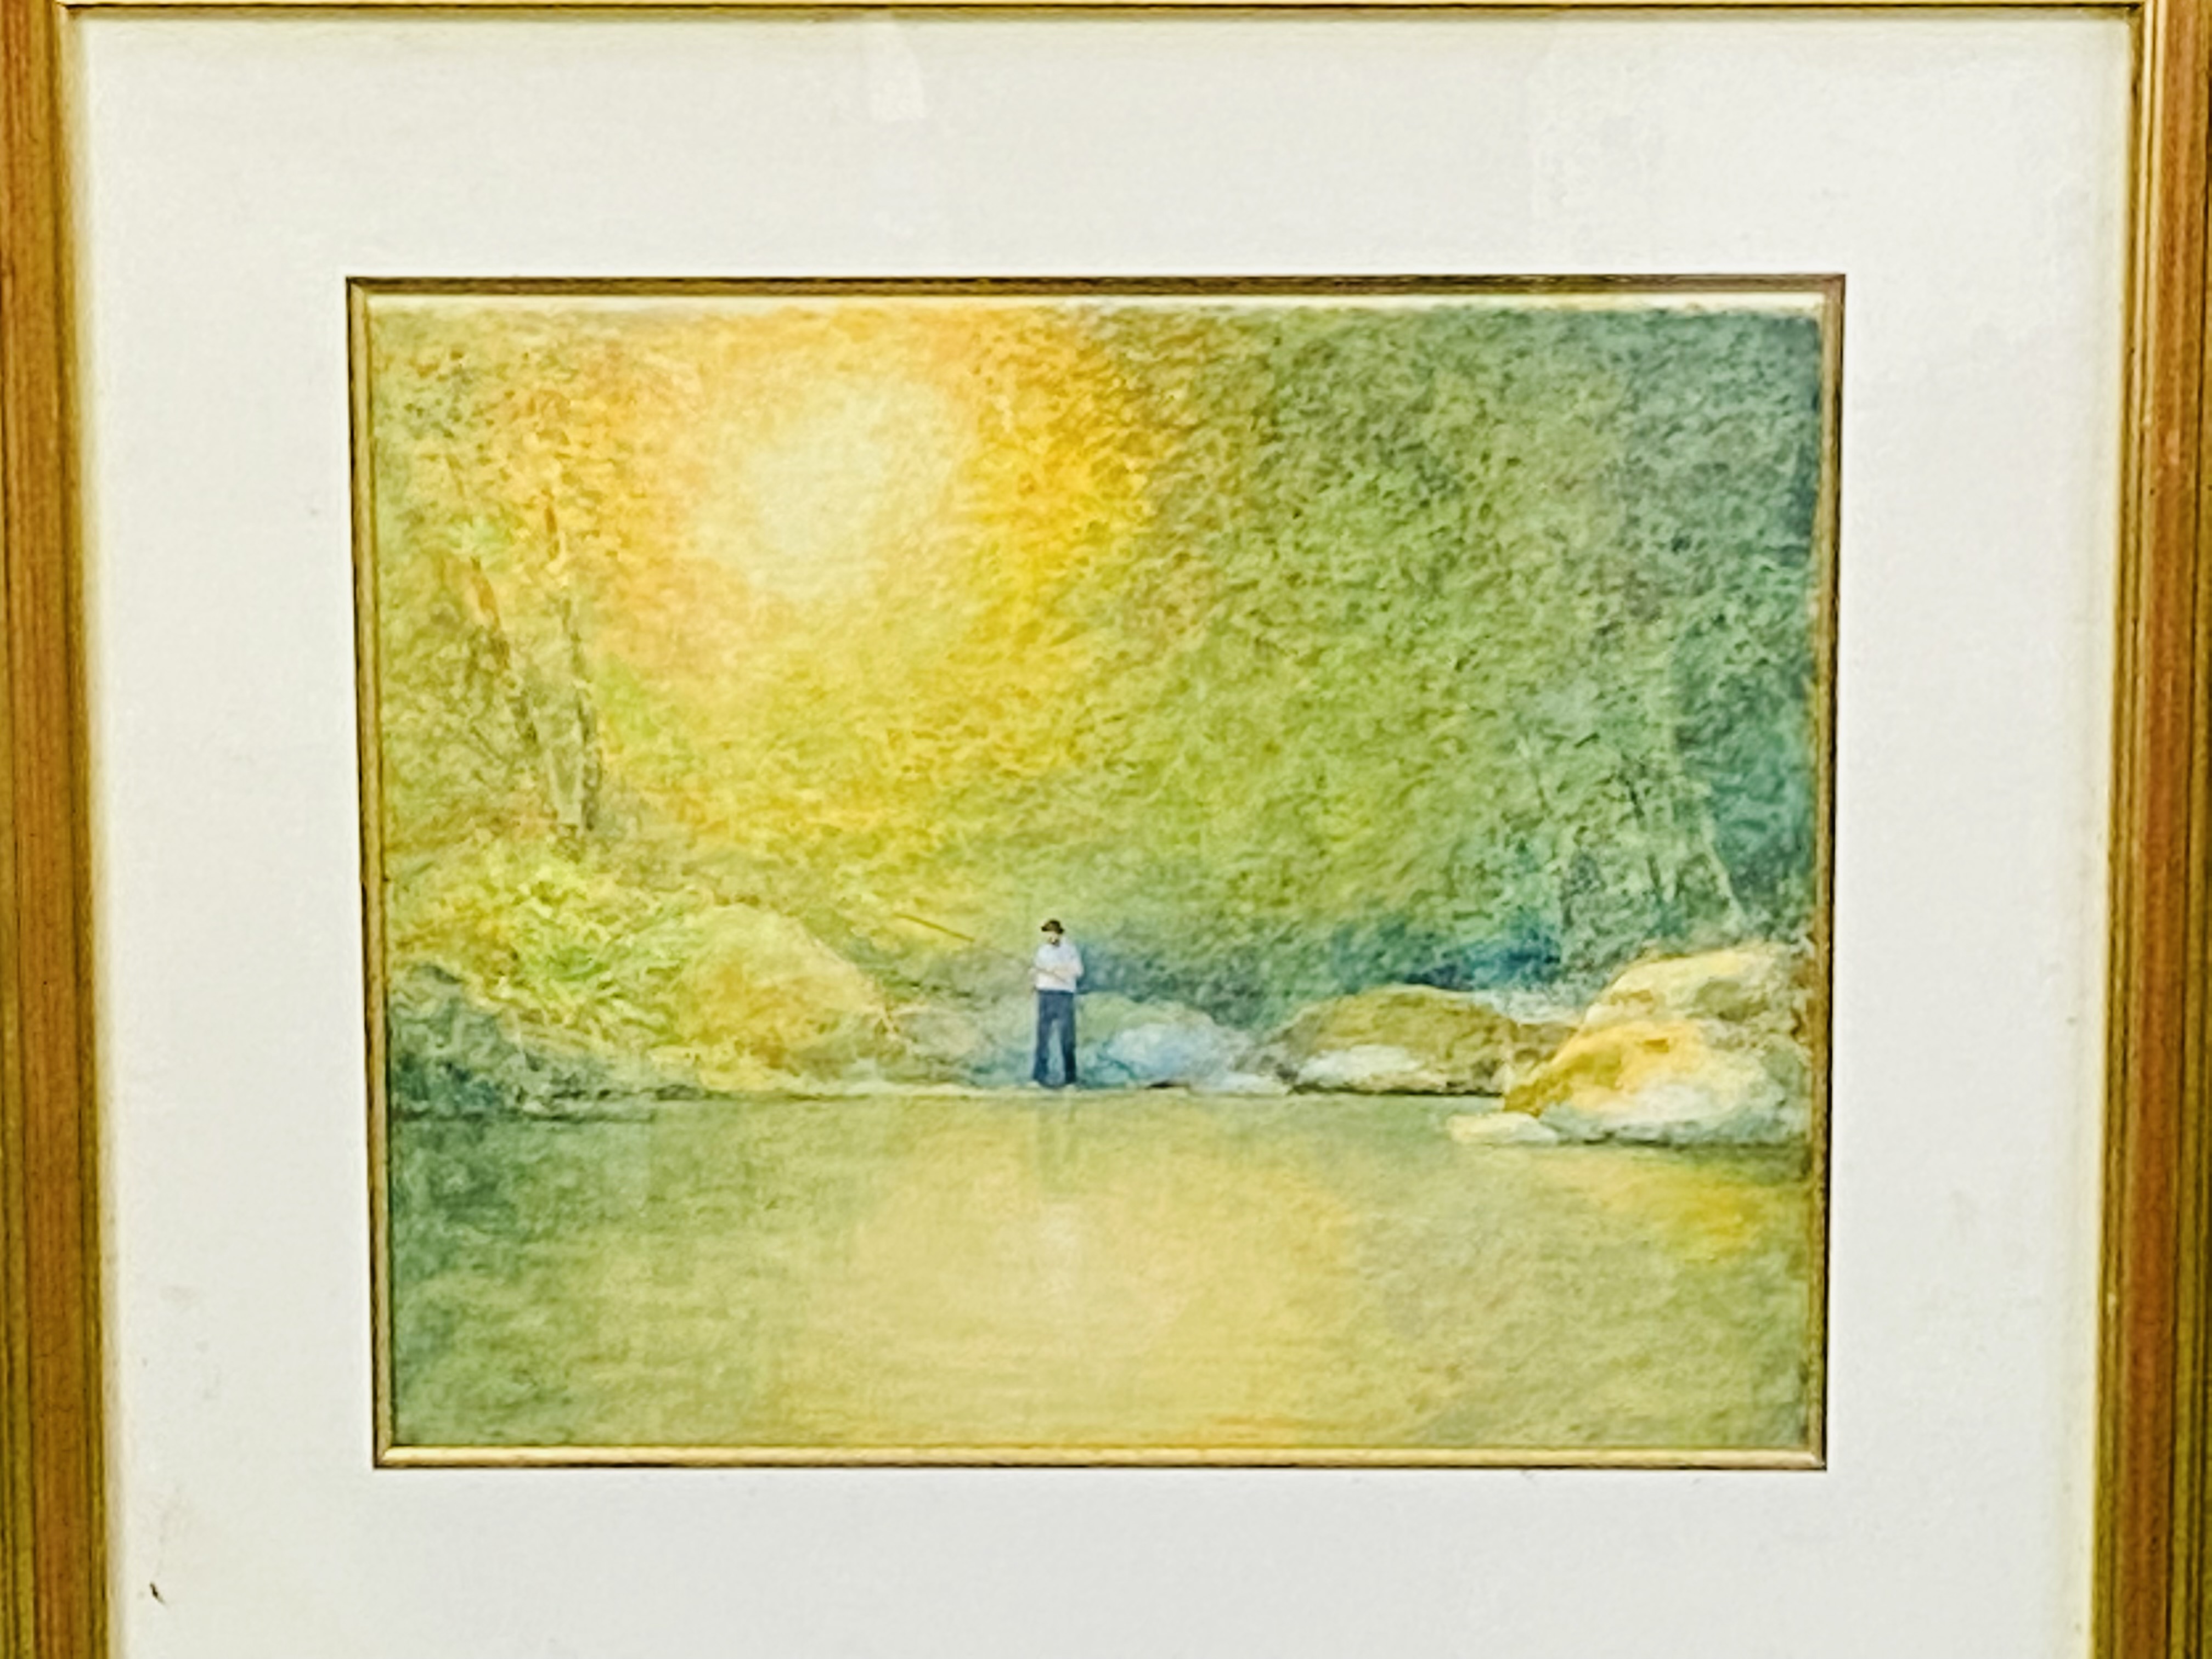 Framed and glazed watercolour of a man fishing - Image 3 of 4